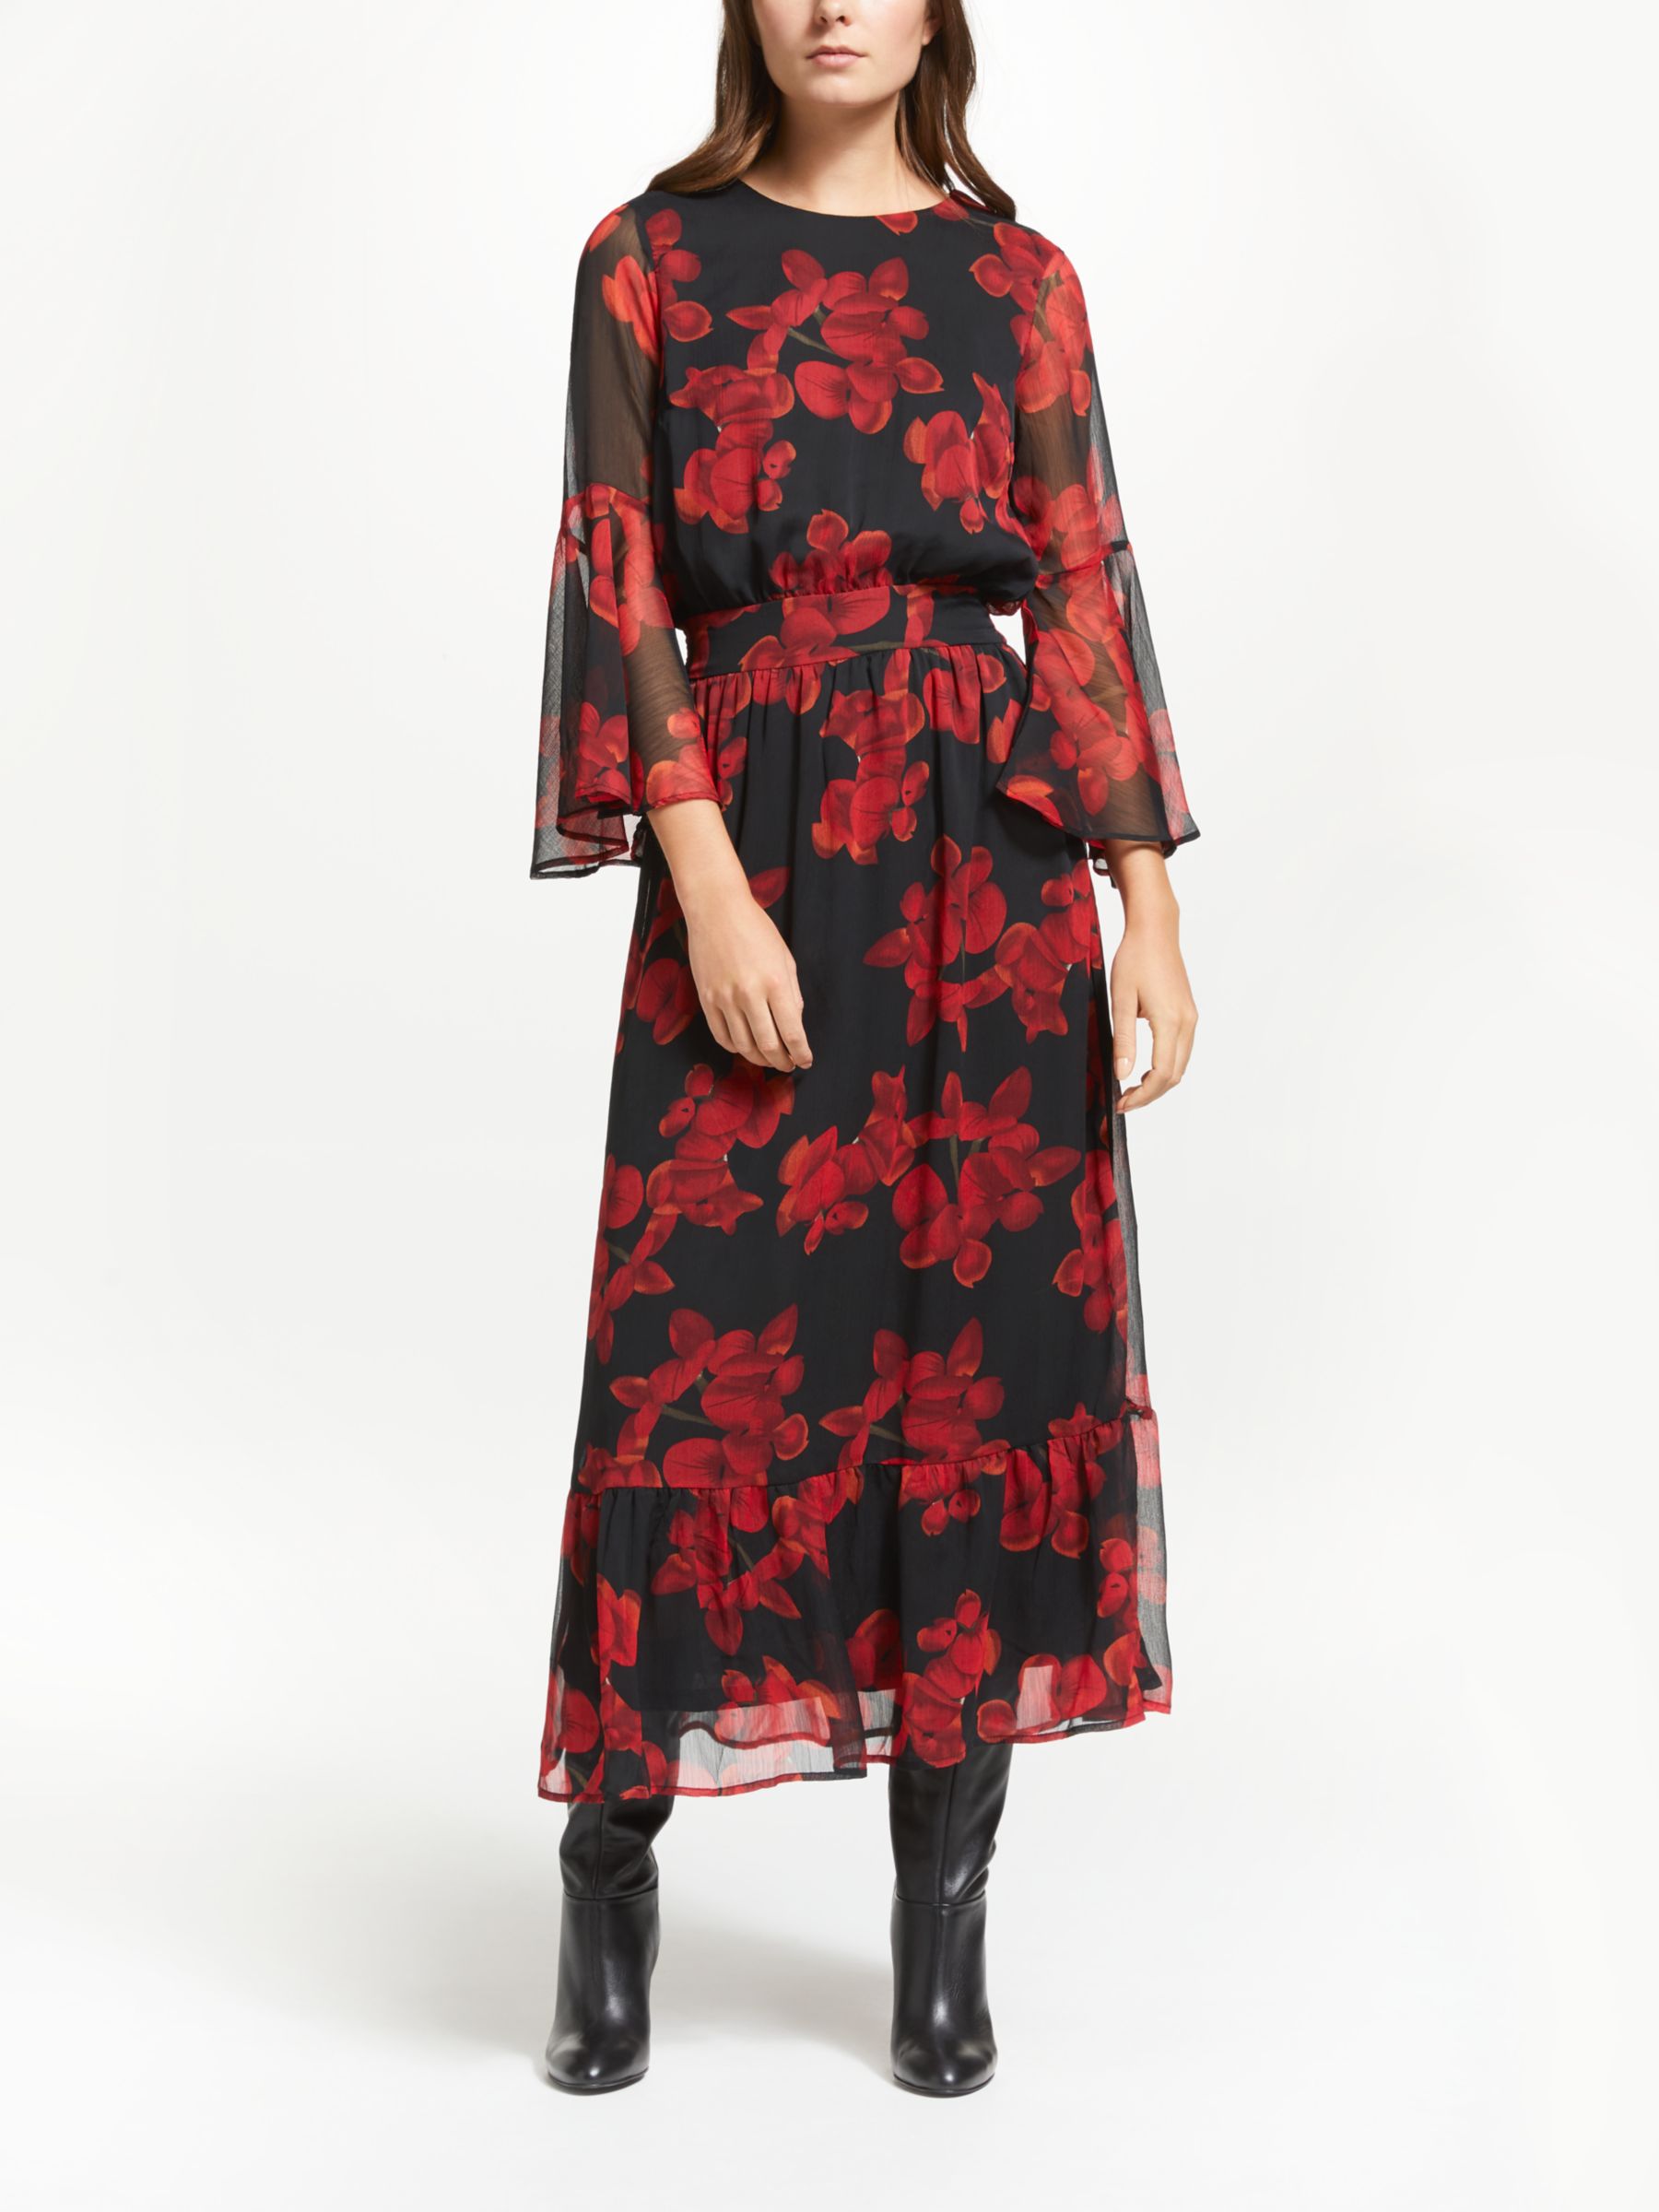 Y.A.S Cymbala Floral Maxi Dress, Black/Red